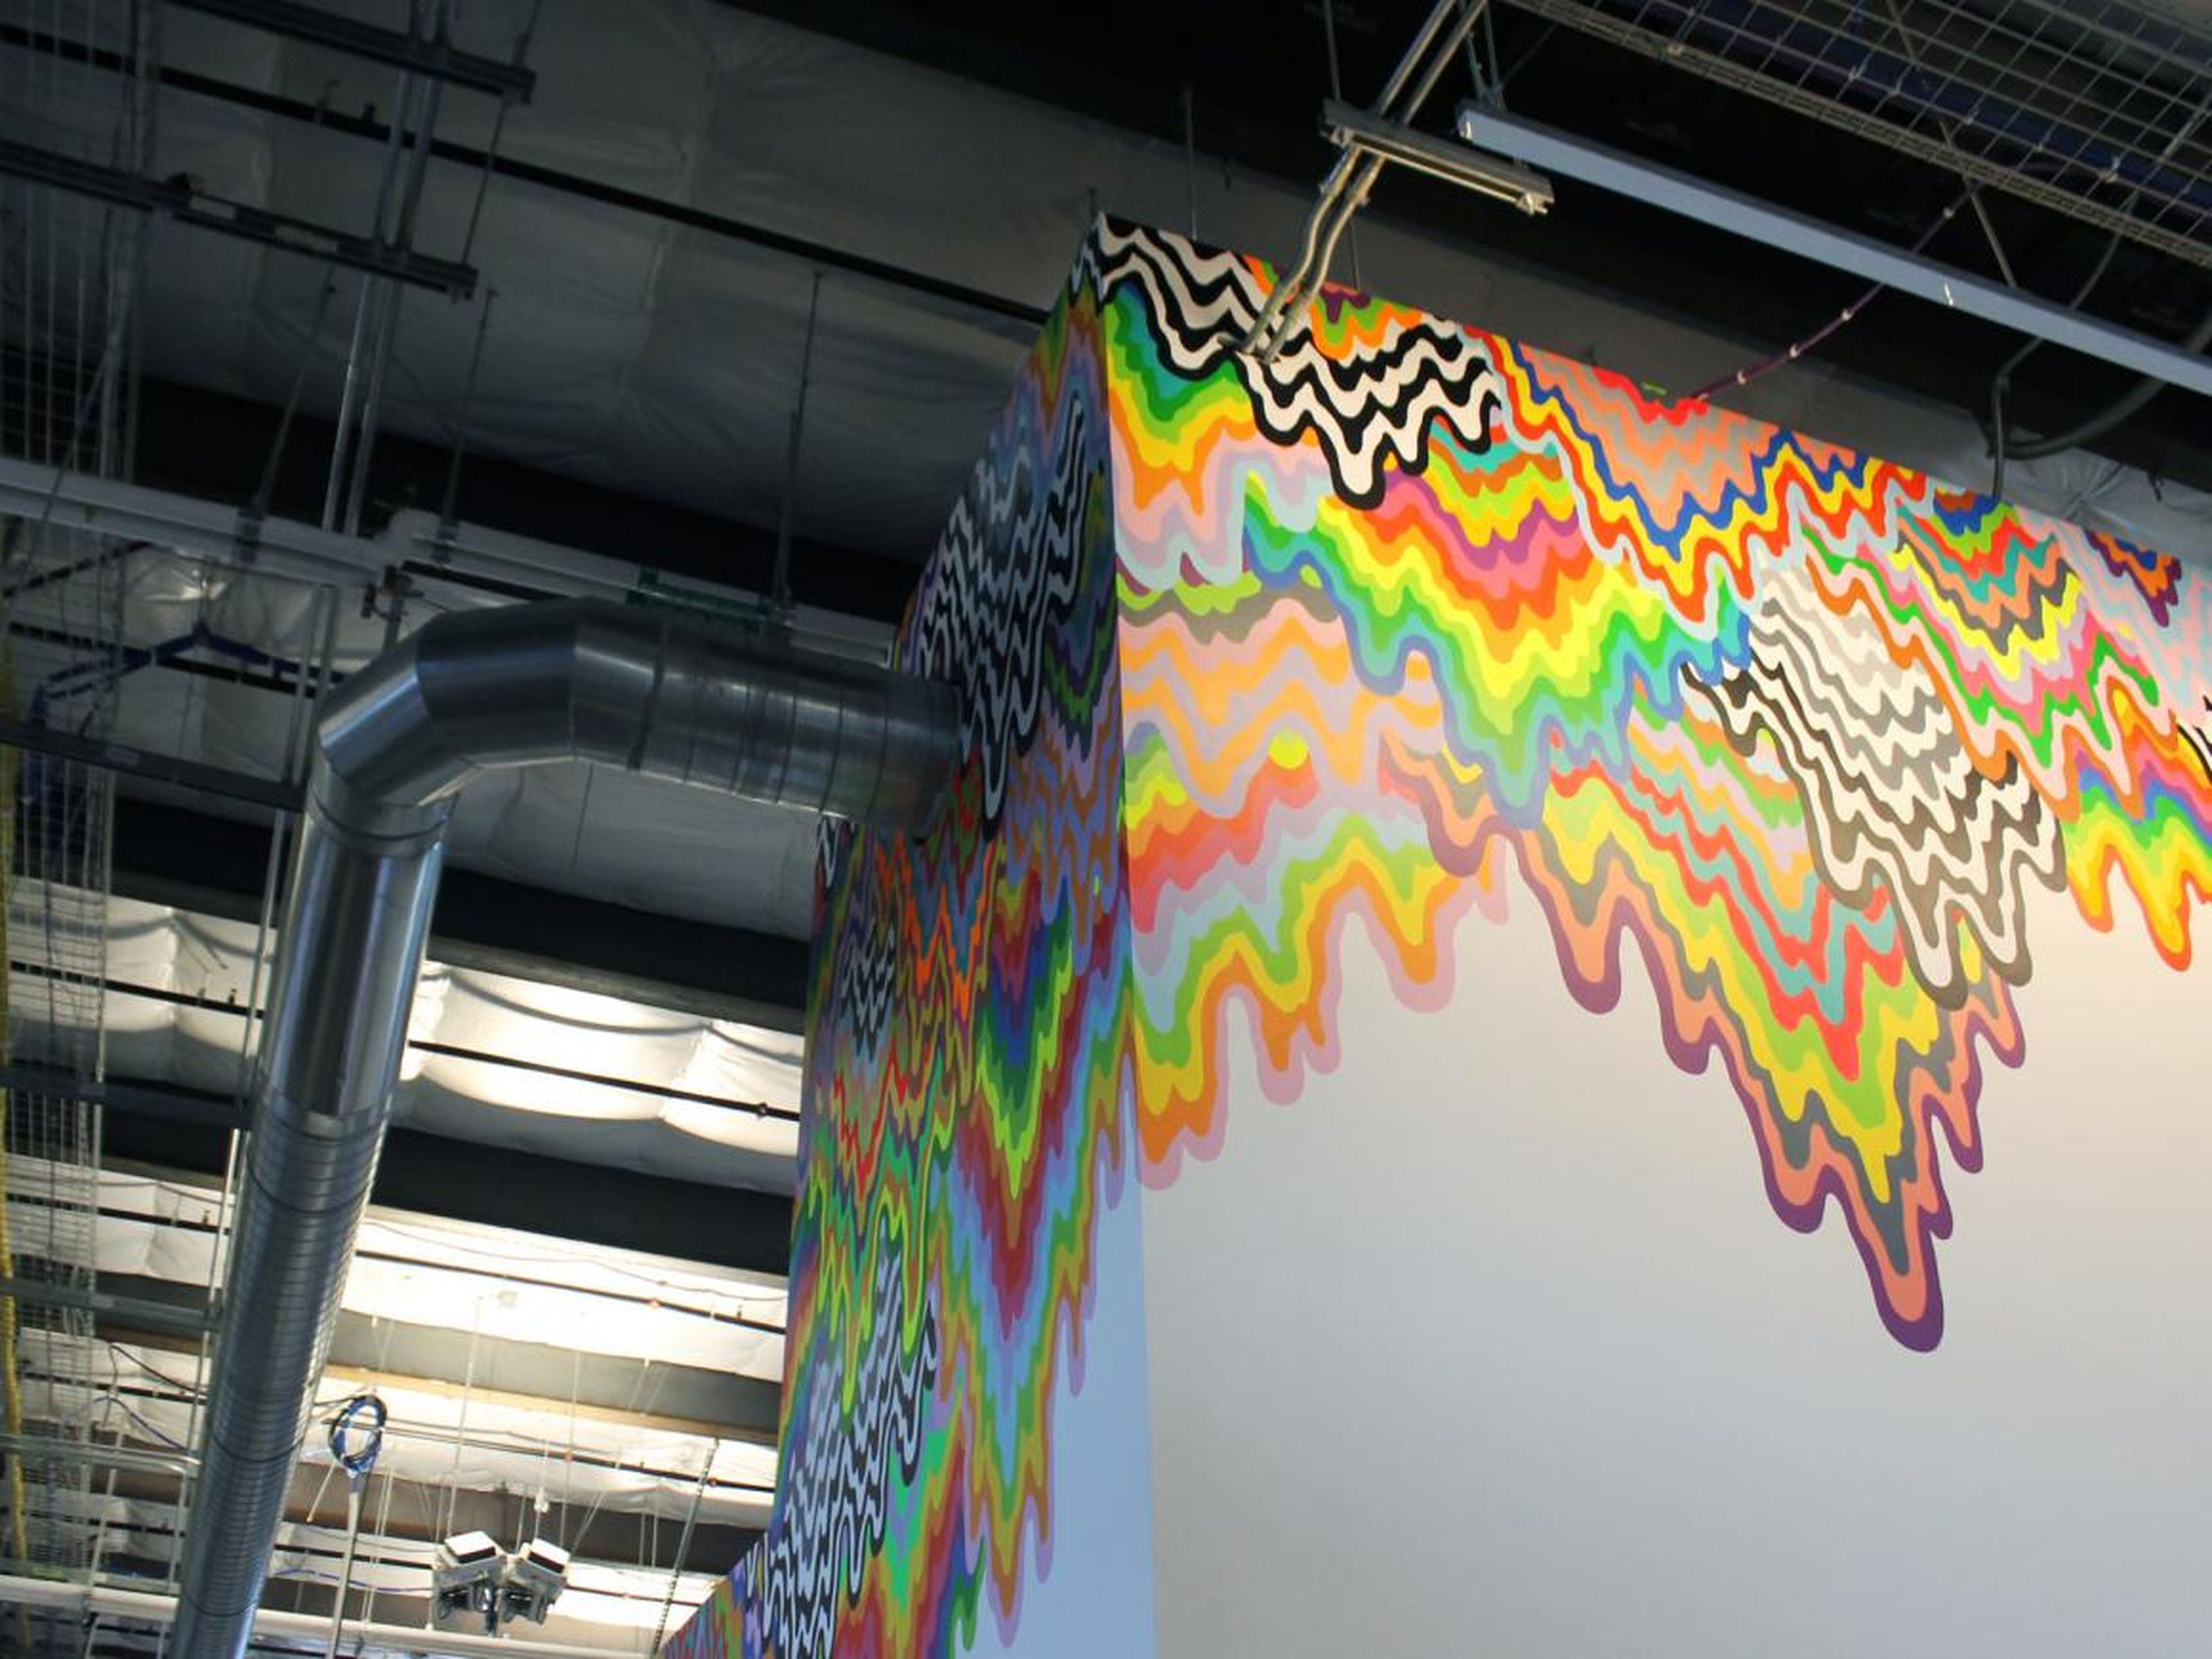 You can't move at Facebook without bumping into a mural